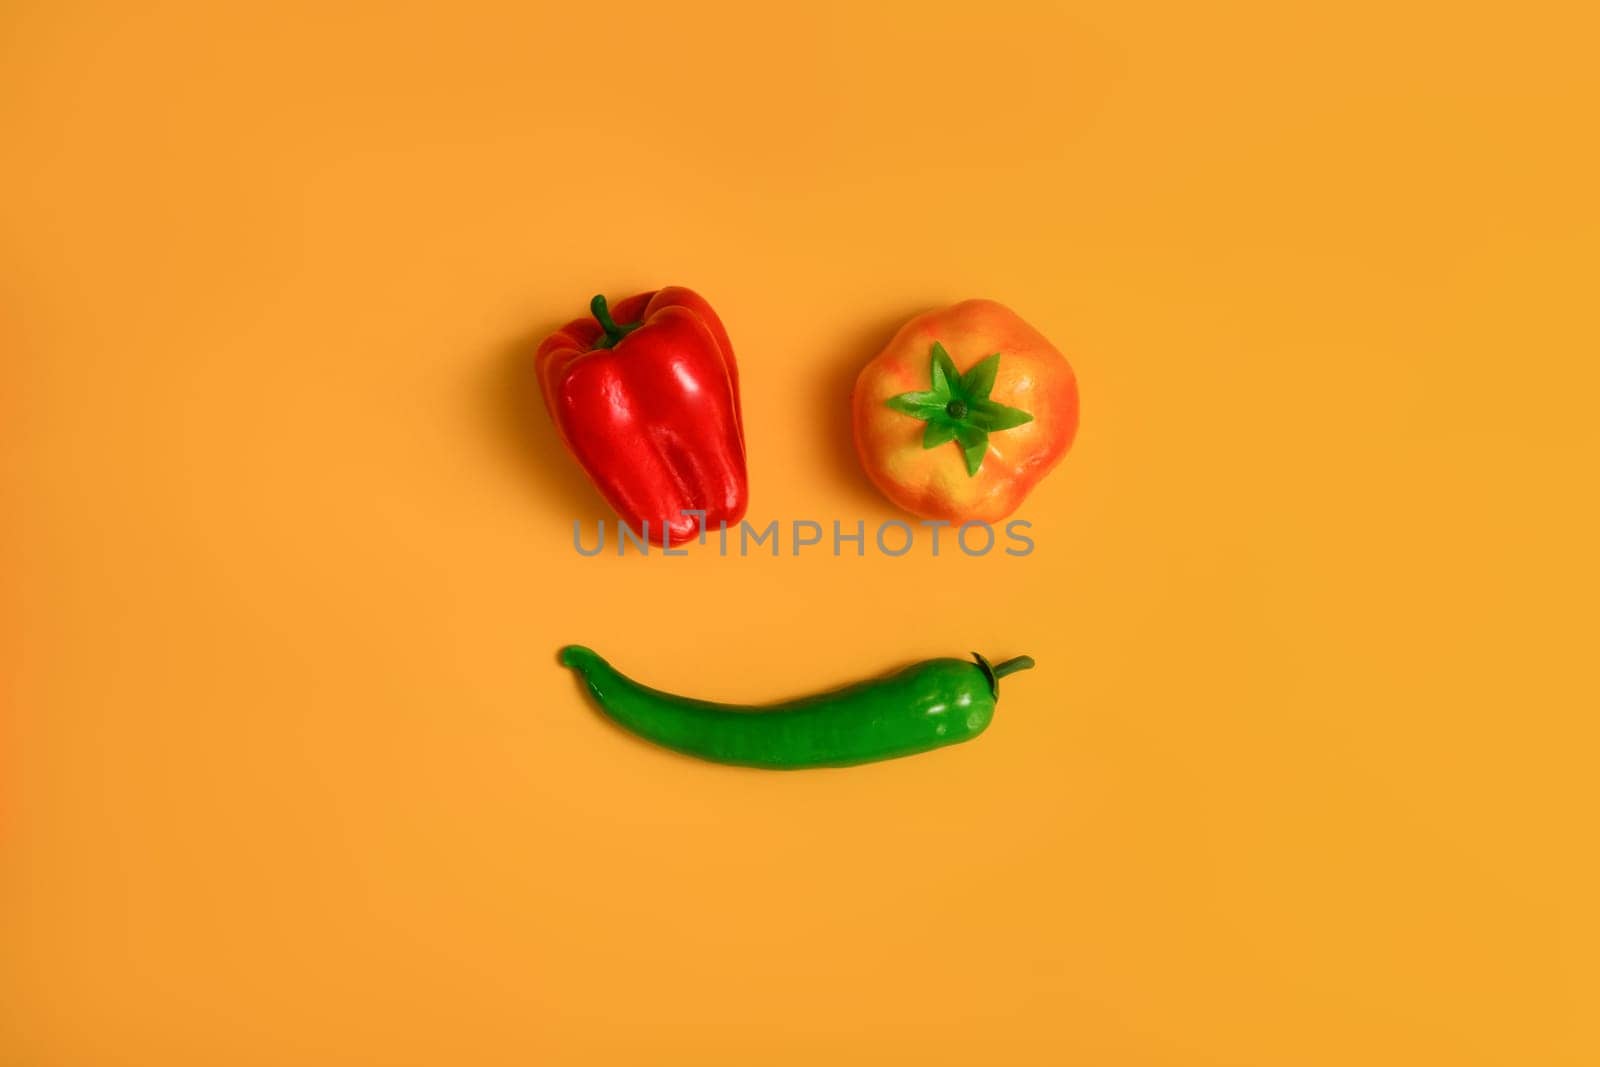 Red, yellow sweet pepper and green chili pepper isolated on yellow background. Healthy food background, vegetable concept.